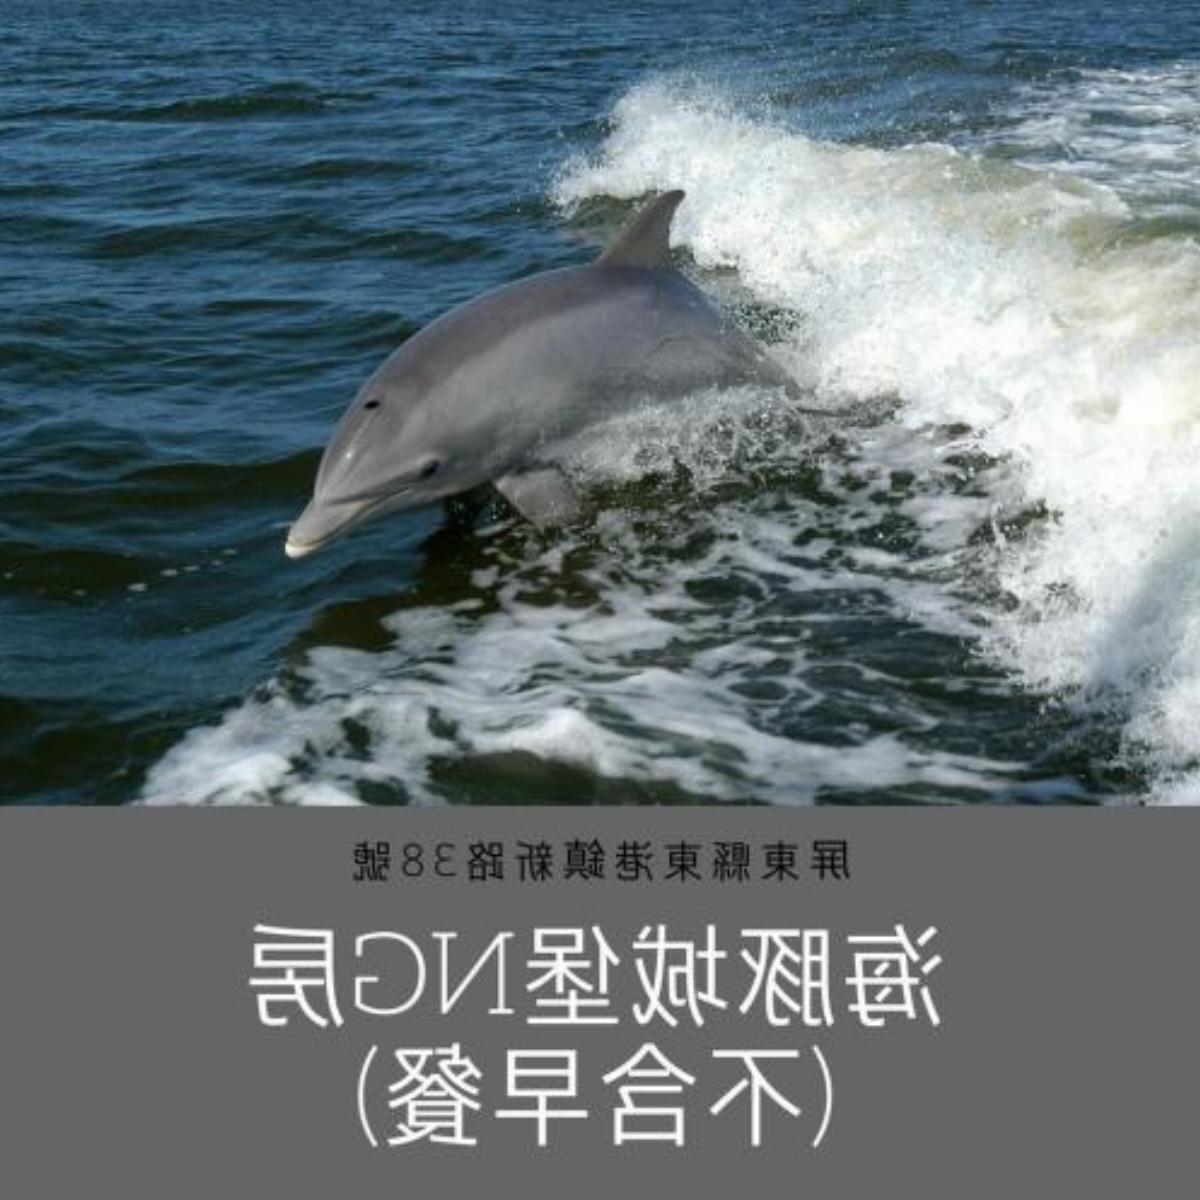 Dolphin Castle Hotel Donggang Taiwan